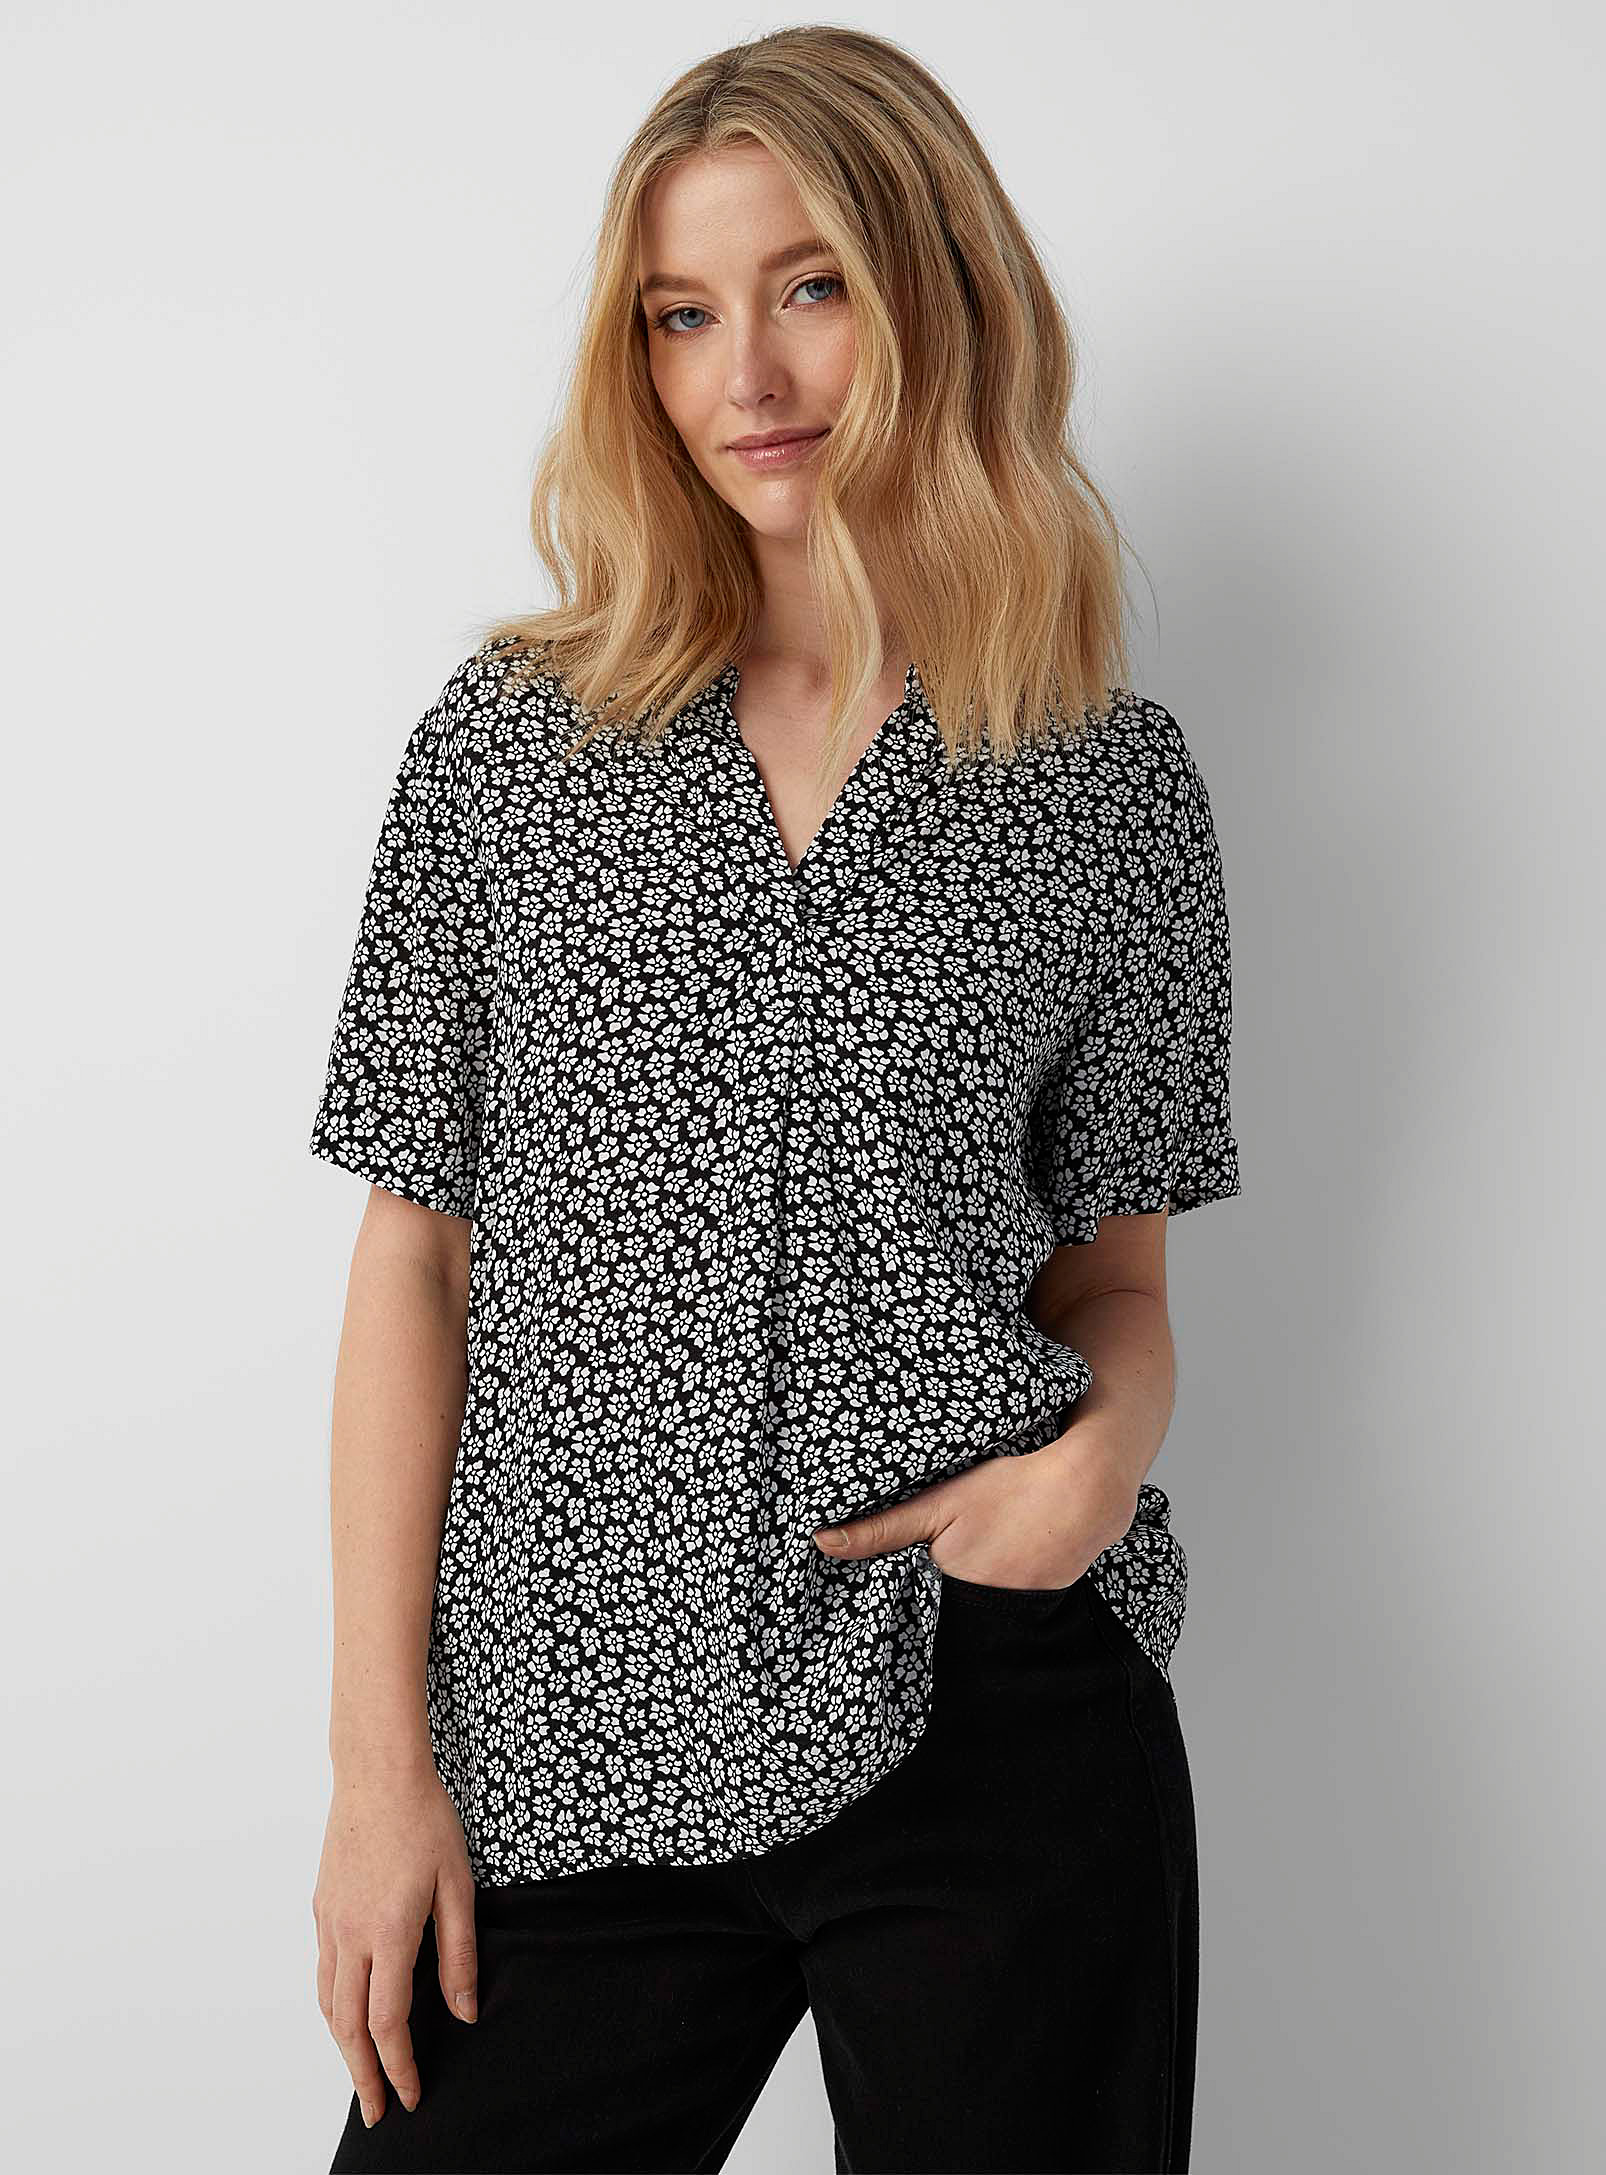 Contemporaine Cuffed Sleeves Flowered Blouse In Black And White